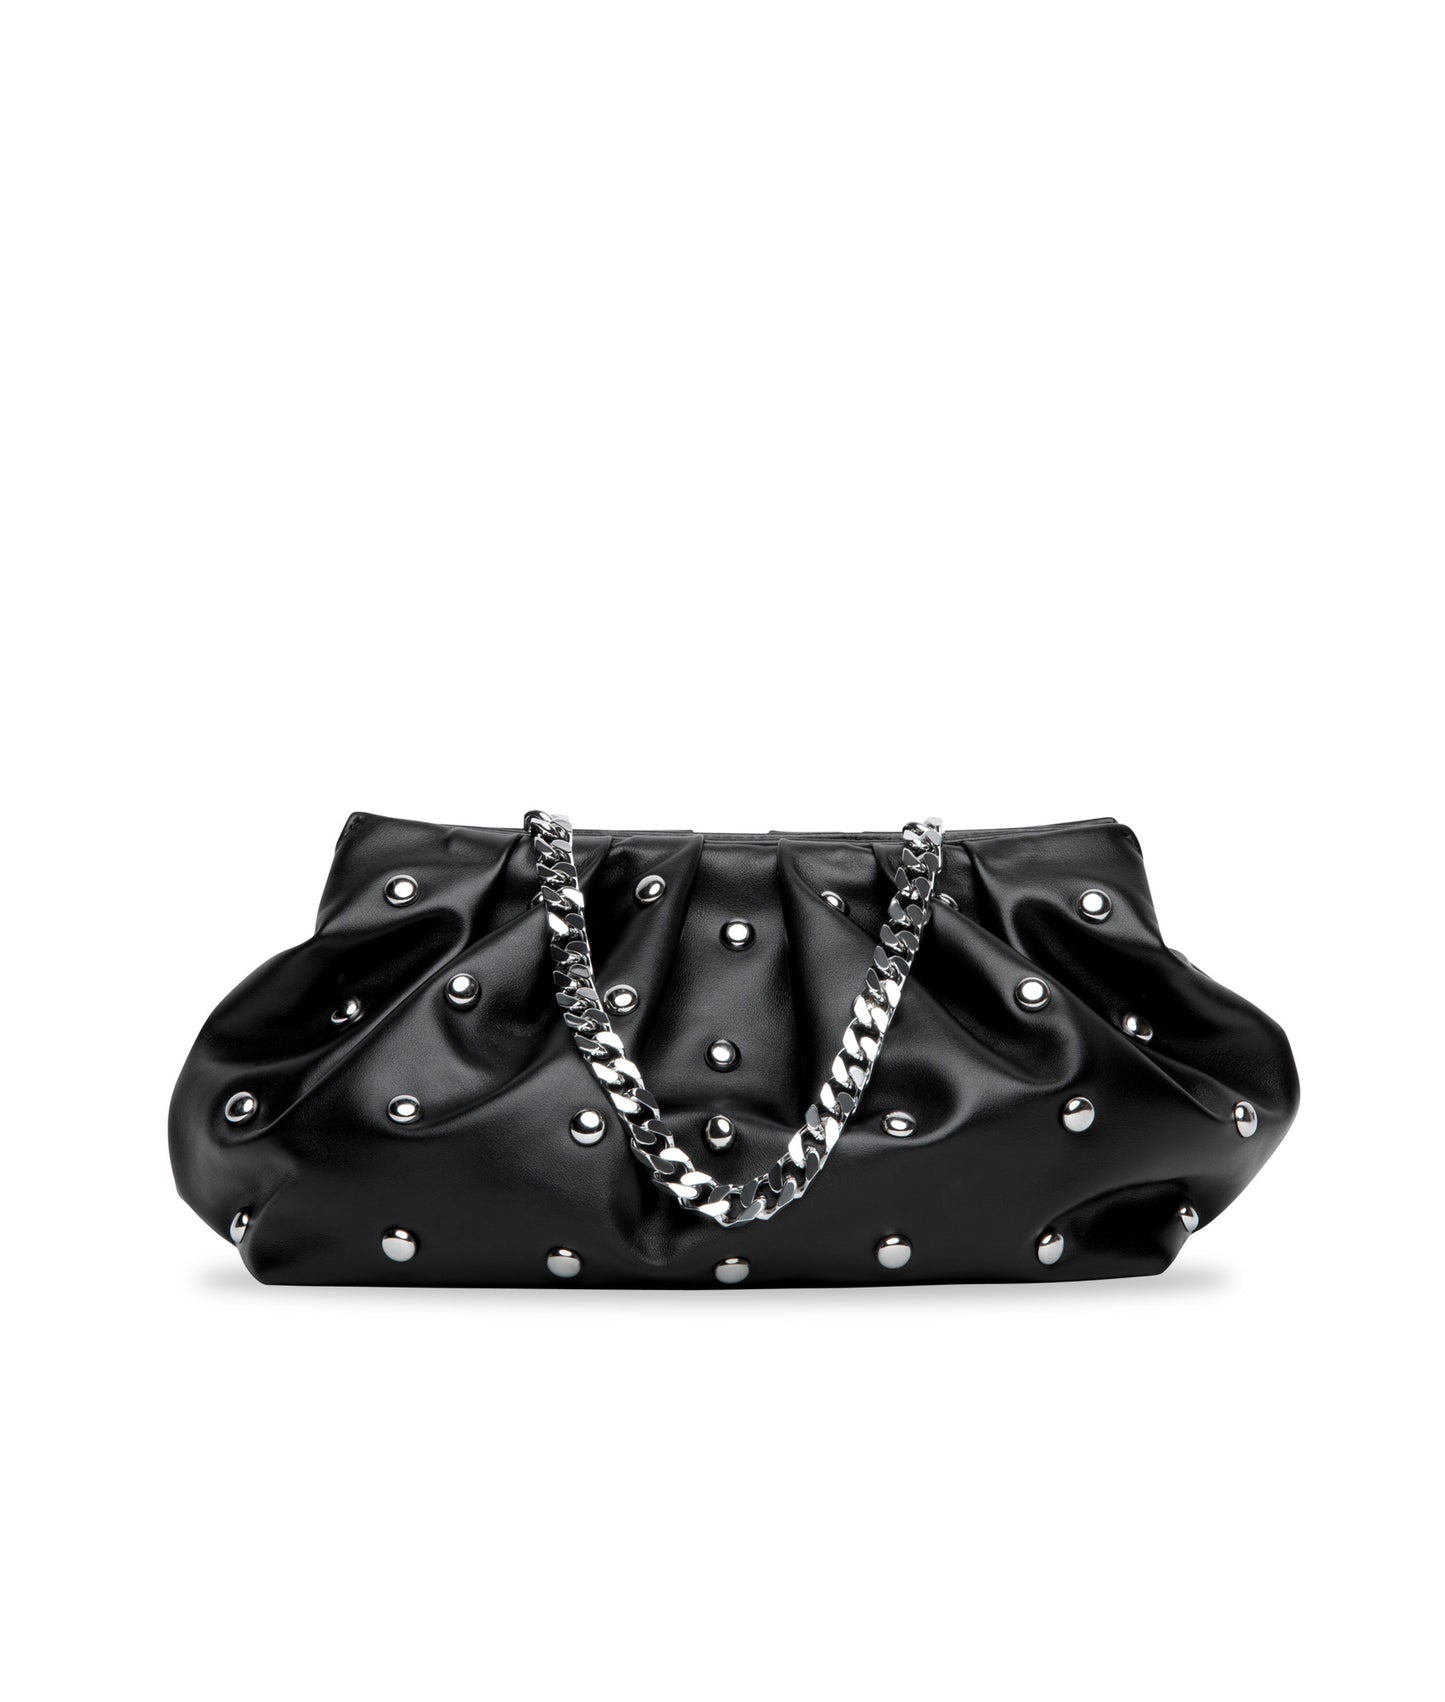 Julie in Black Italian Leather with Studs